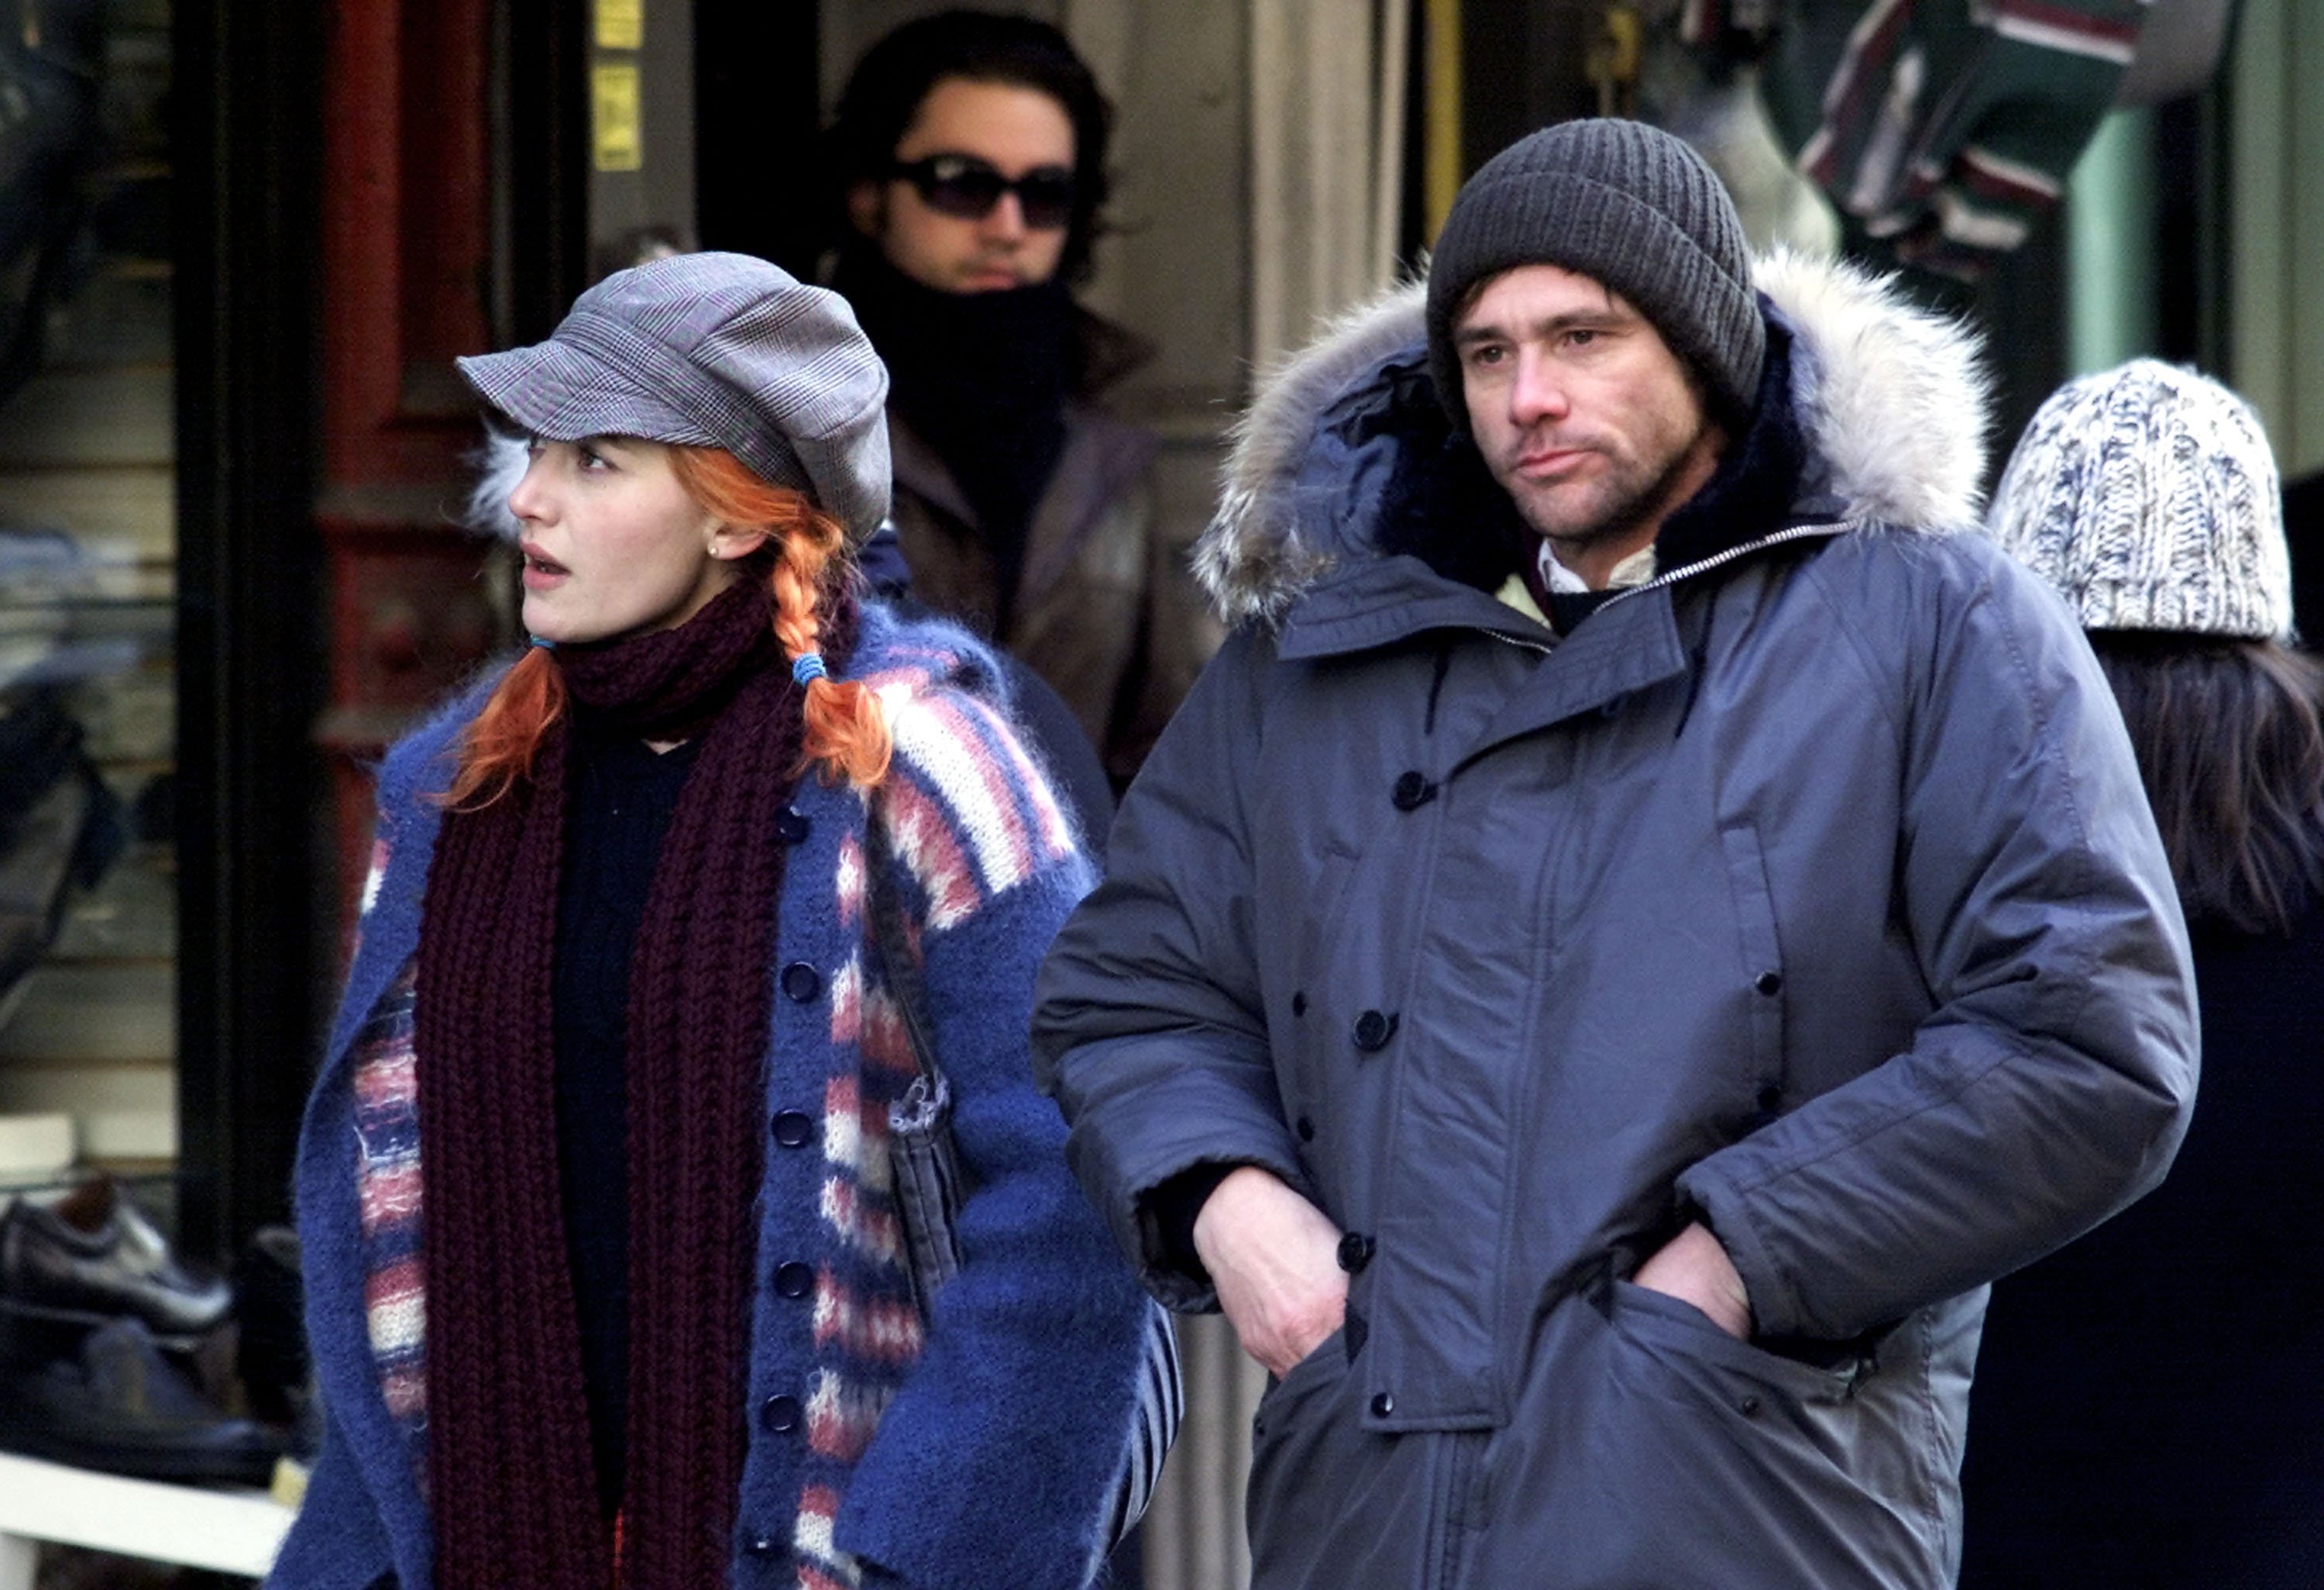 Jim Carrey’s ‘Eternal Sunshine of the Spotless Mind’ Turns 20: See the Cast Then and Now